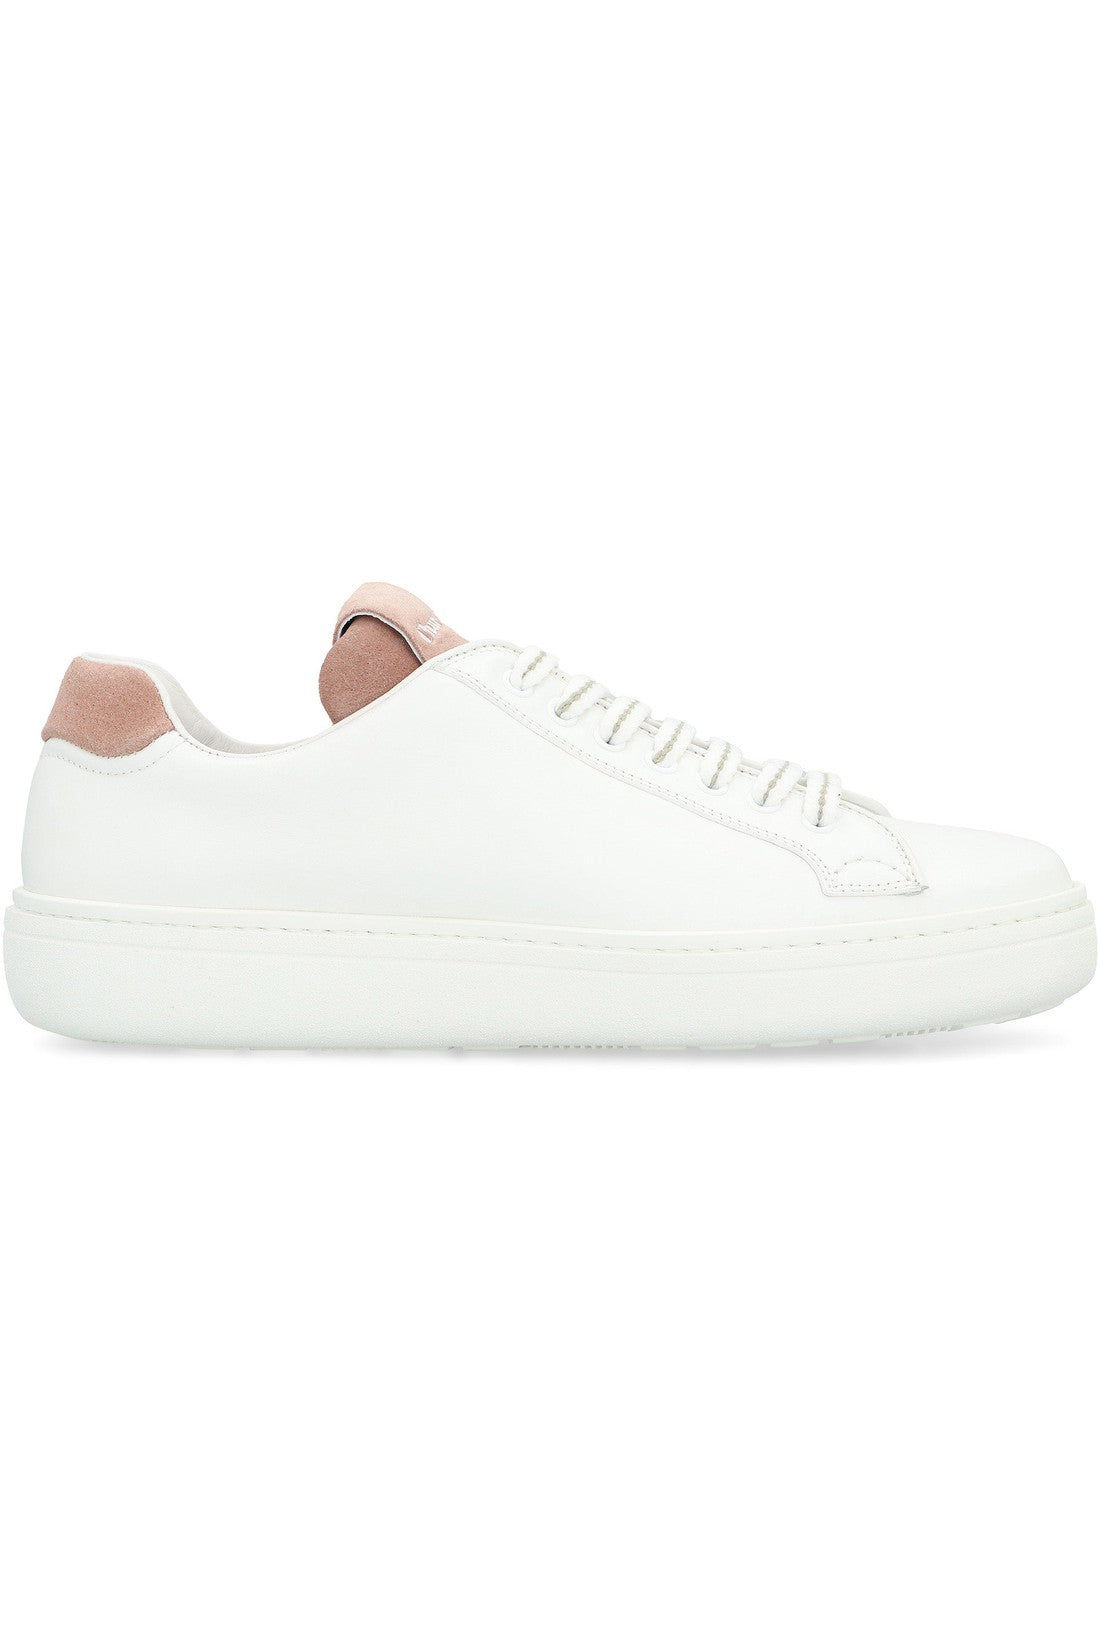 Church's-OUTLET-SALE-Bowland W leather low-top sneakers-ARCHIVIST